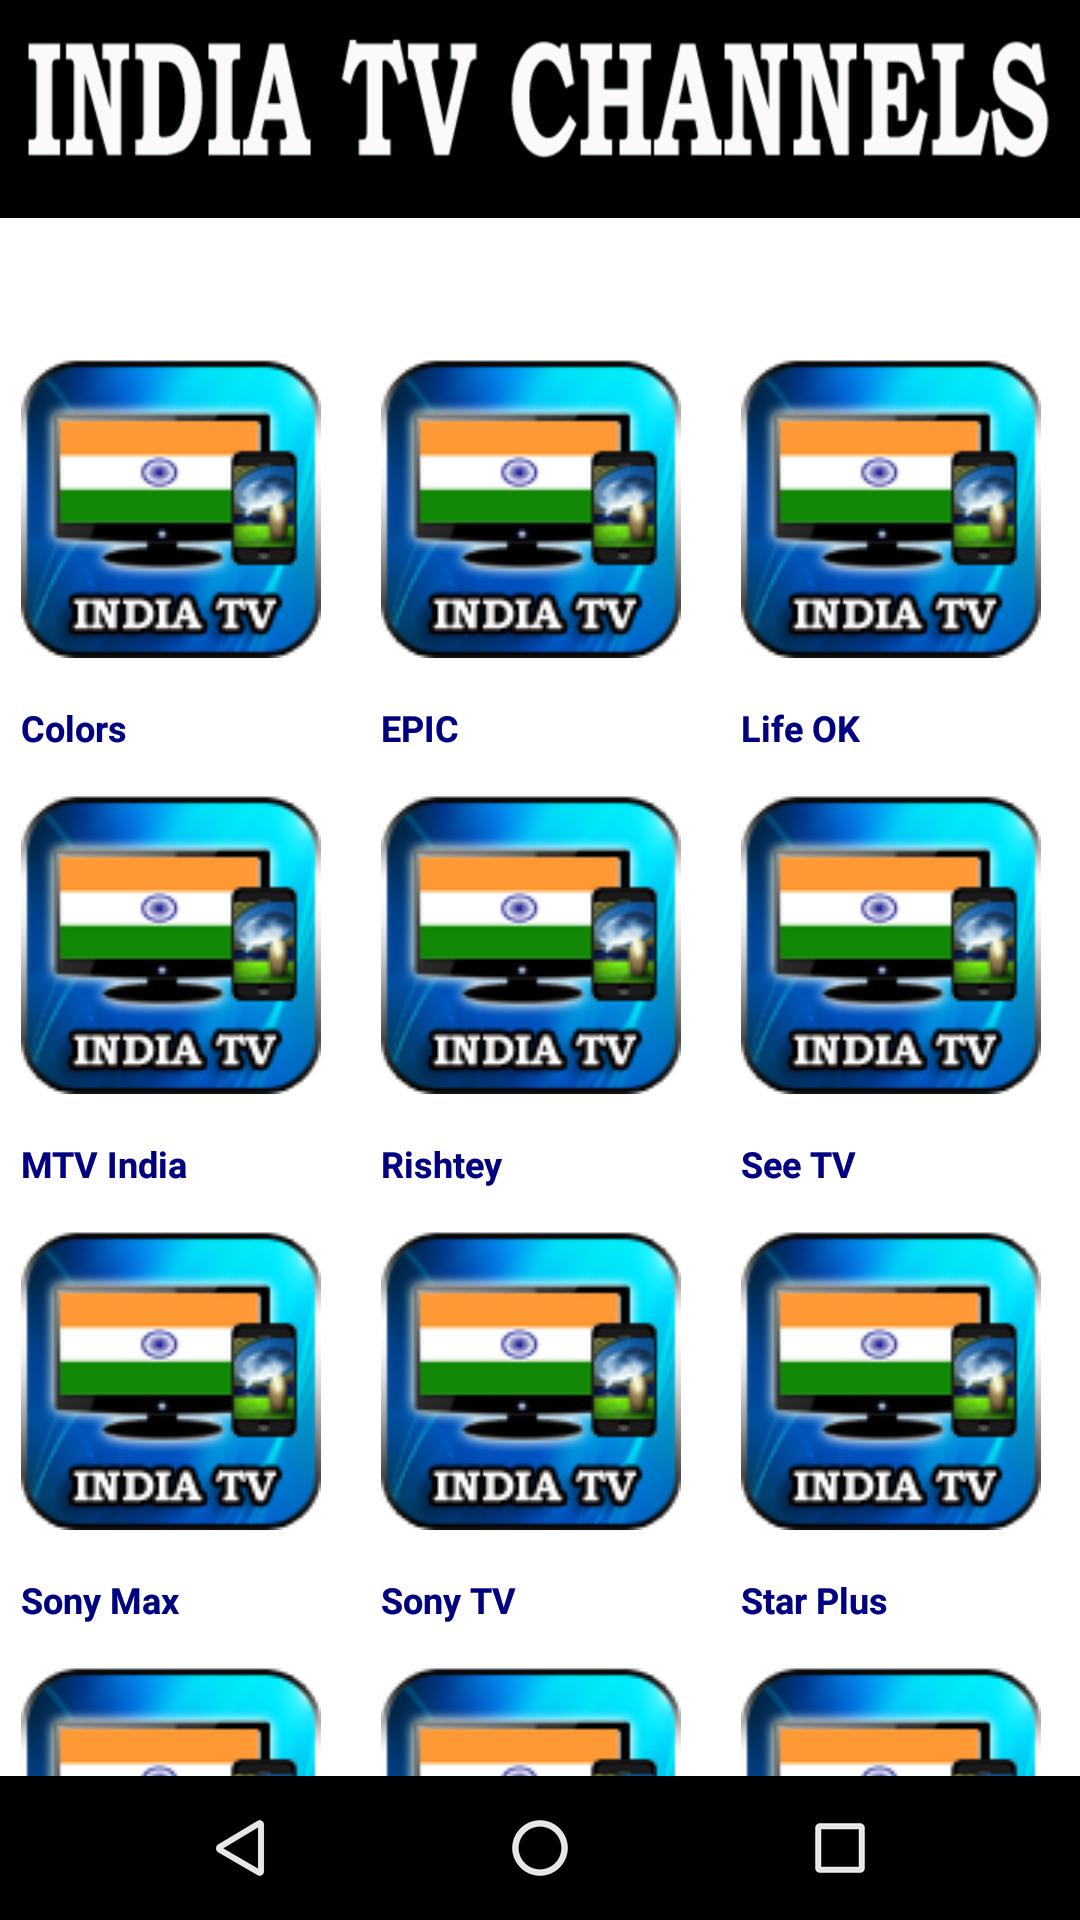 Channels countries. India TV channel.